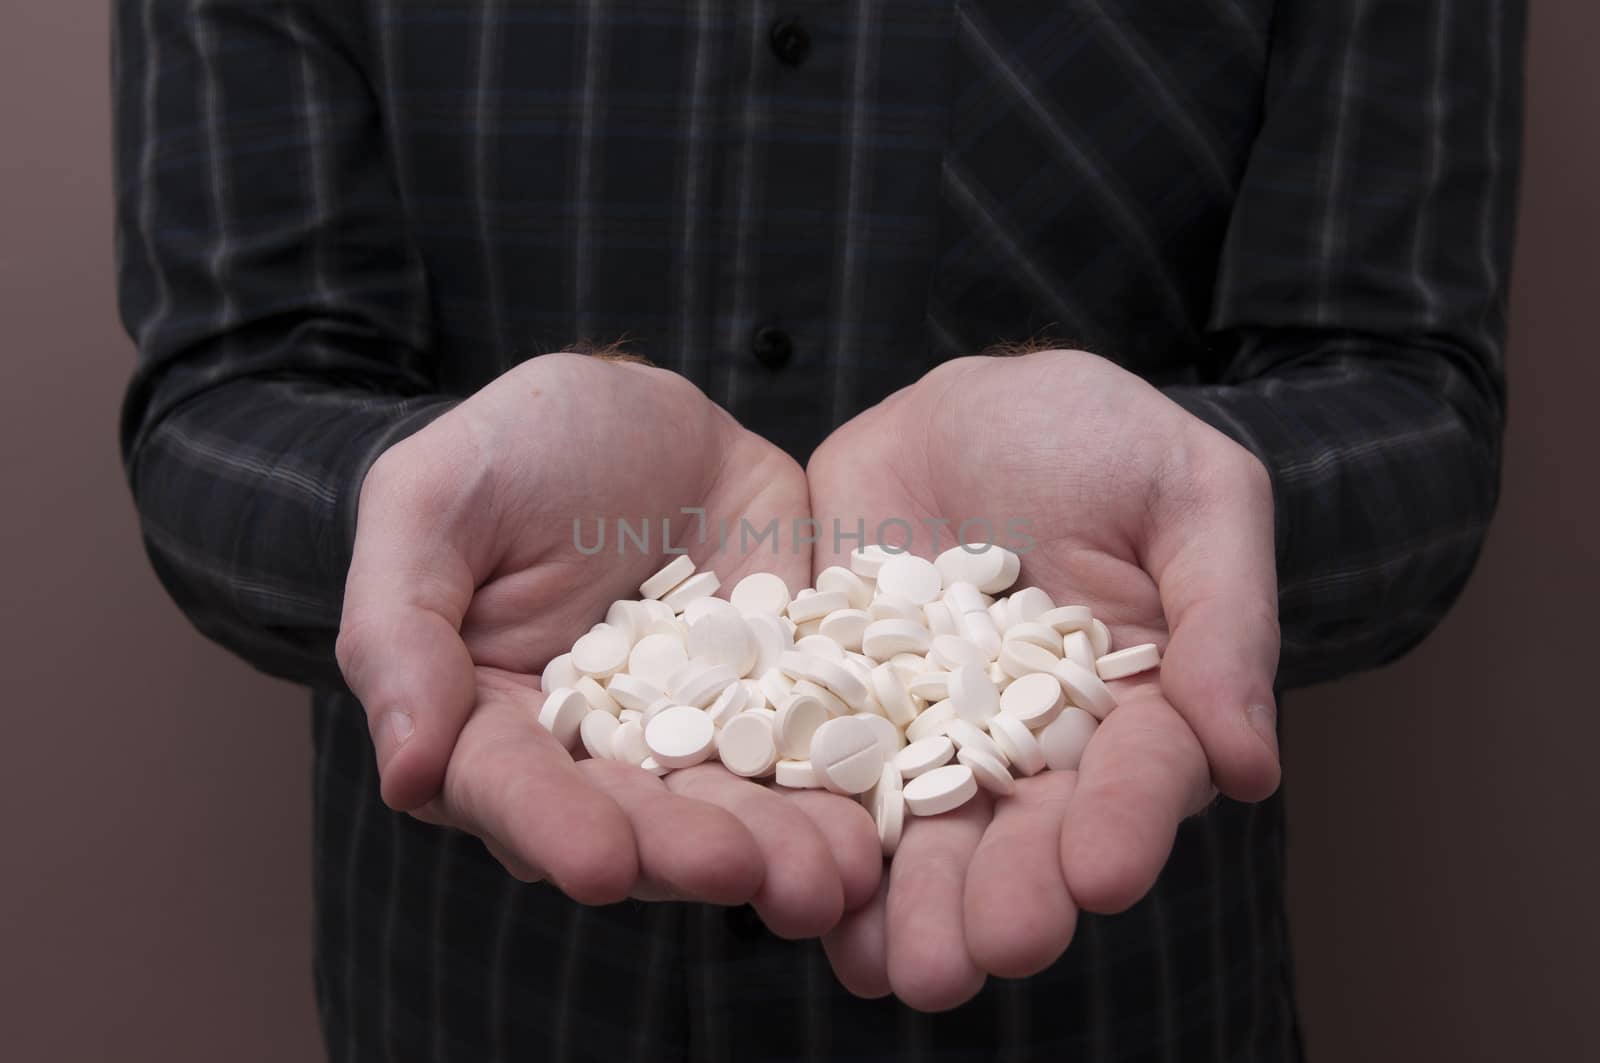 Caucasian Man Holding a Bunch of Pills and Capsules by rodrigobellizzi